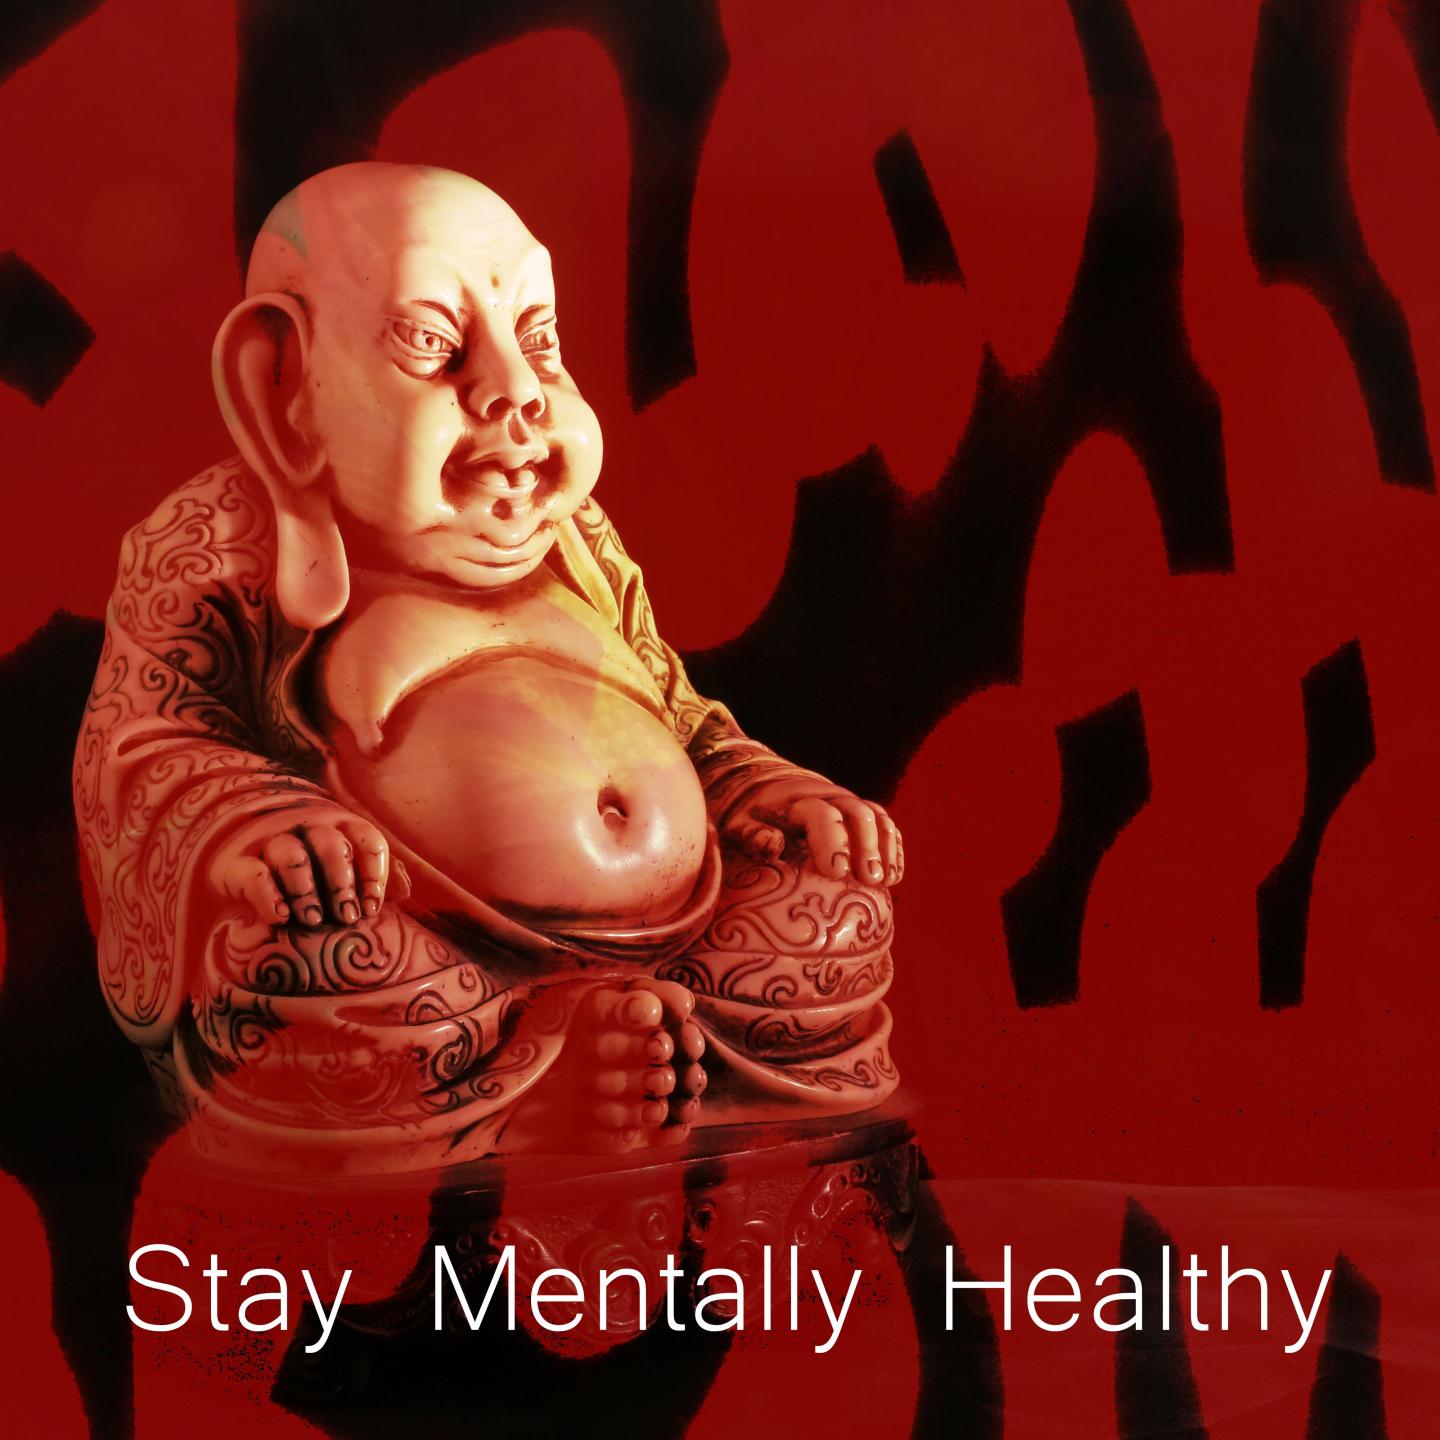 Stay Mentally Healthy